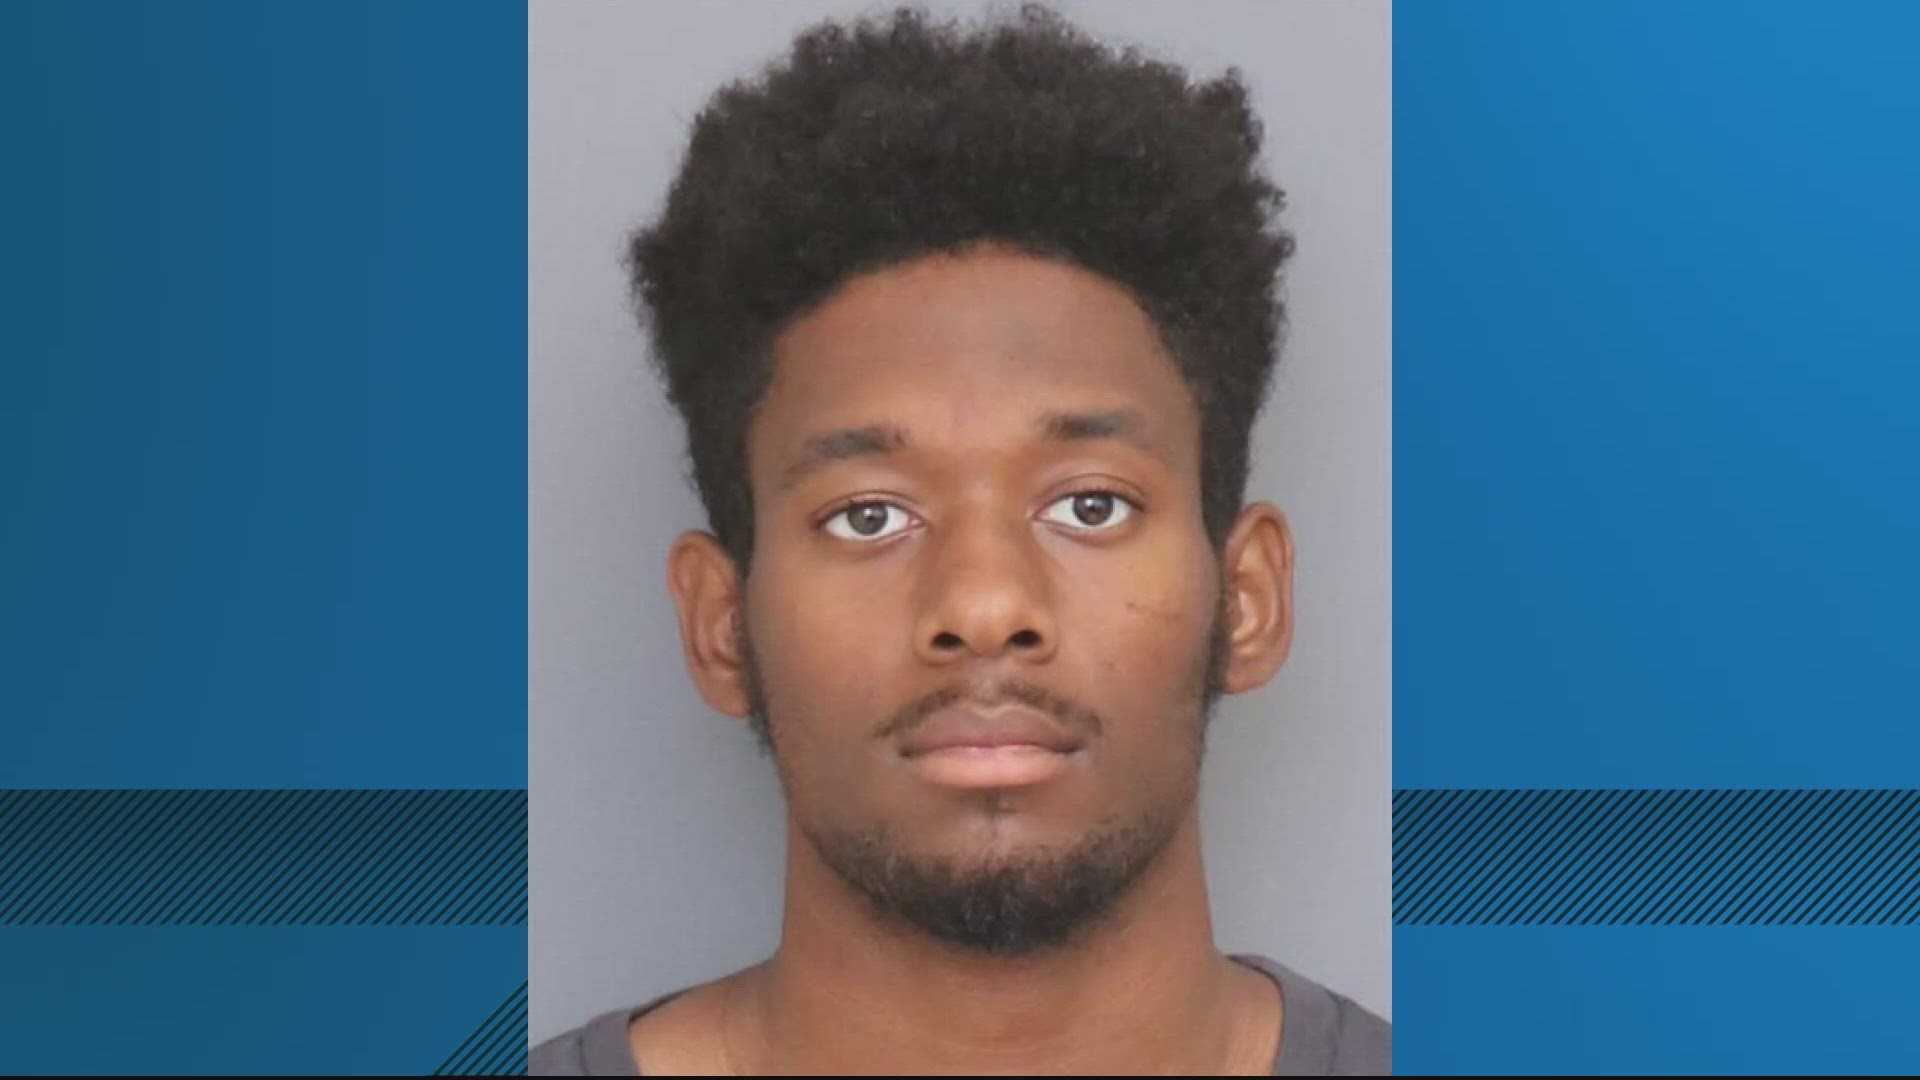 The mother of a 20-year-old man accused of killing a 73-year old woman using a stolen forklift from a Lowes store in Waldorf early Saturday